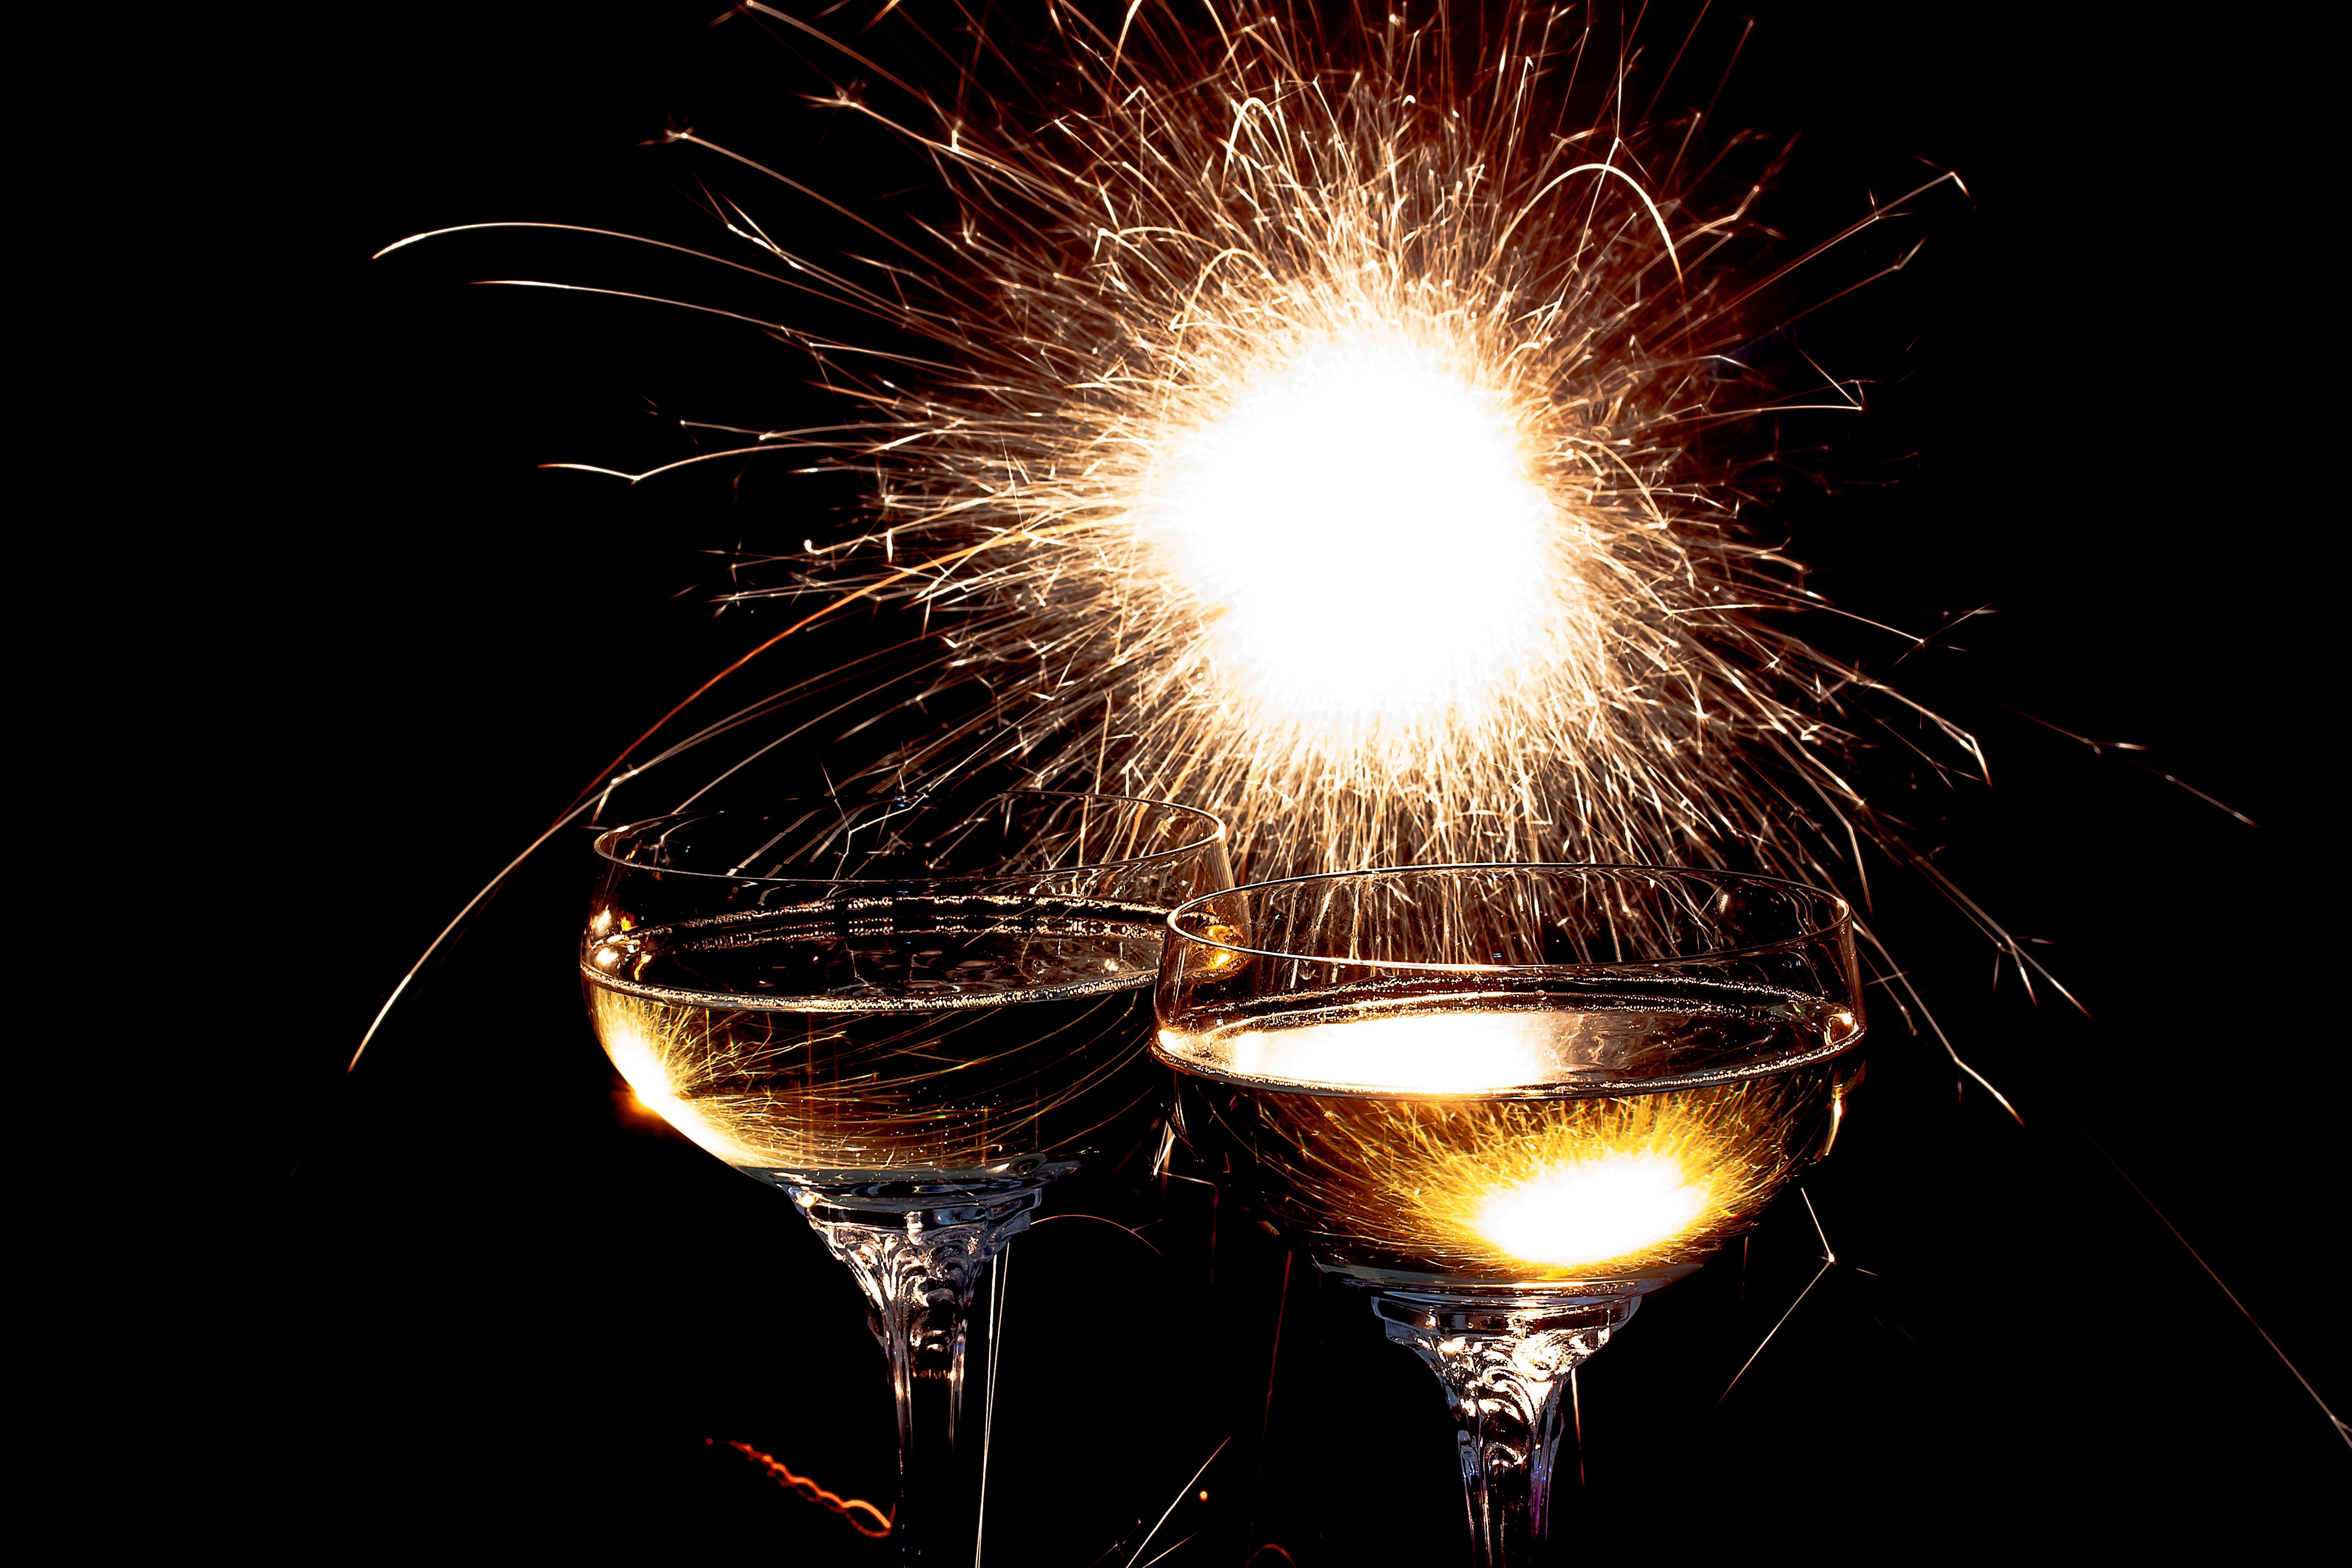 Fireworks Sparklers with two glasses of Champagne image - Free stock photo - Public Domain photo ...